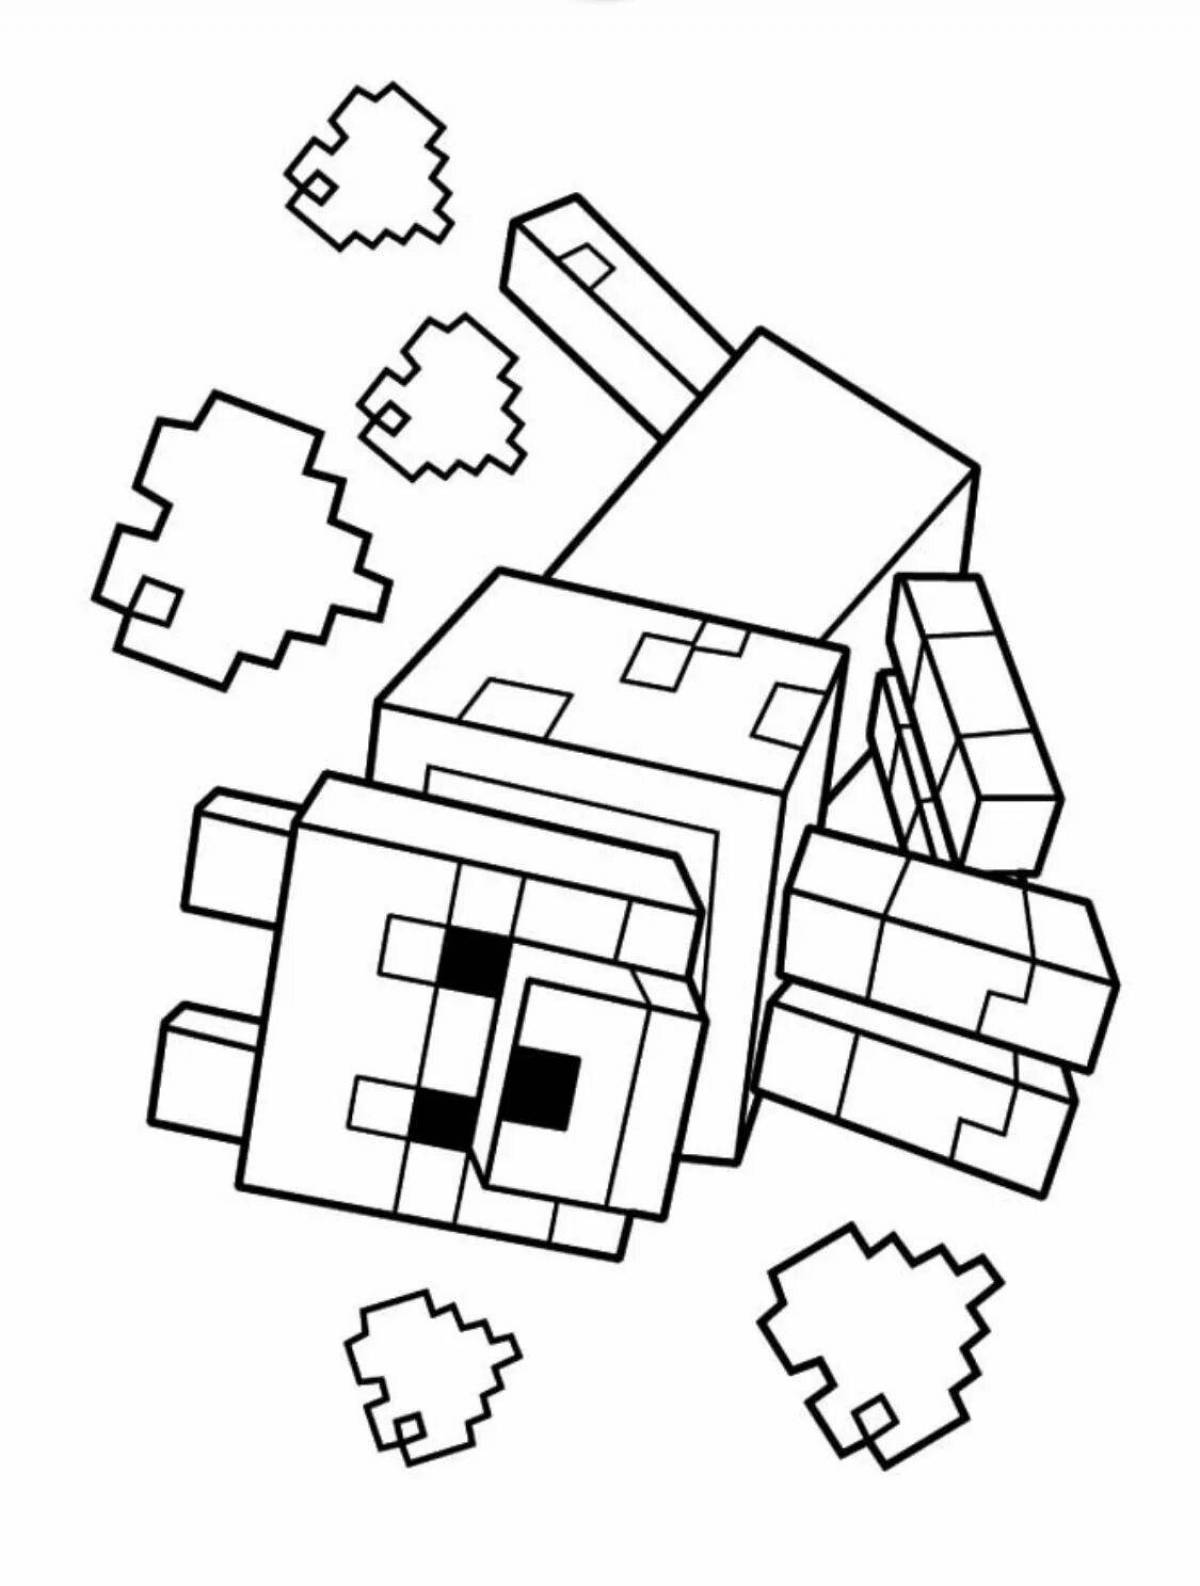 Coloring cute minecraft house